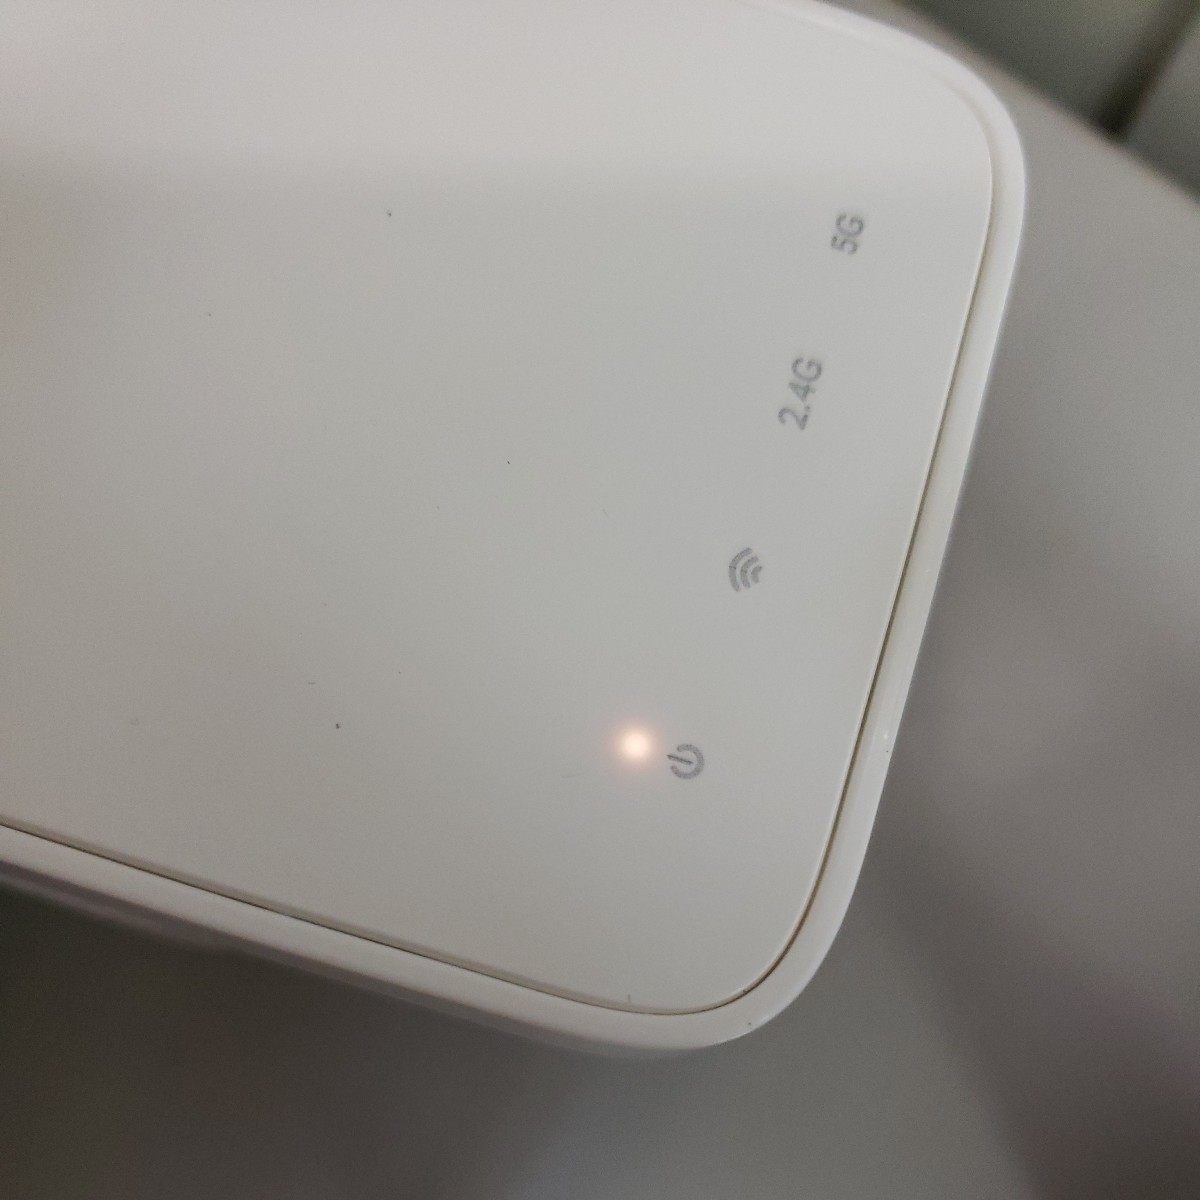 602y0710★TP-Link WiFi 無線LAN 中継機 Wi-Fi 5 11ac AC1200 866+300Mbps Wi-Fi中継機 コンパクト コンセント RE330の画像2